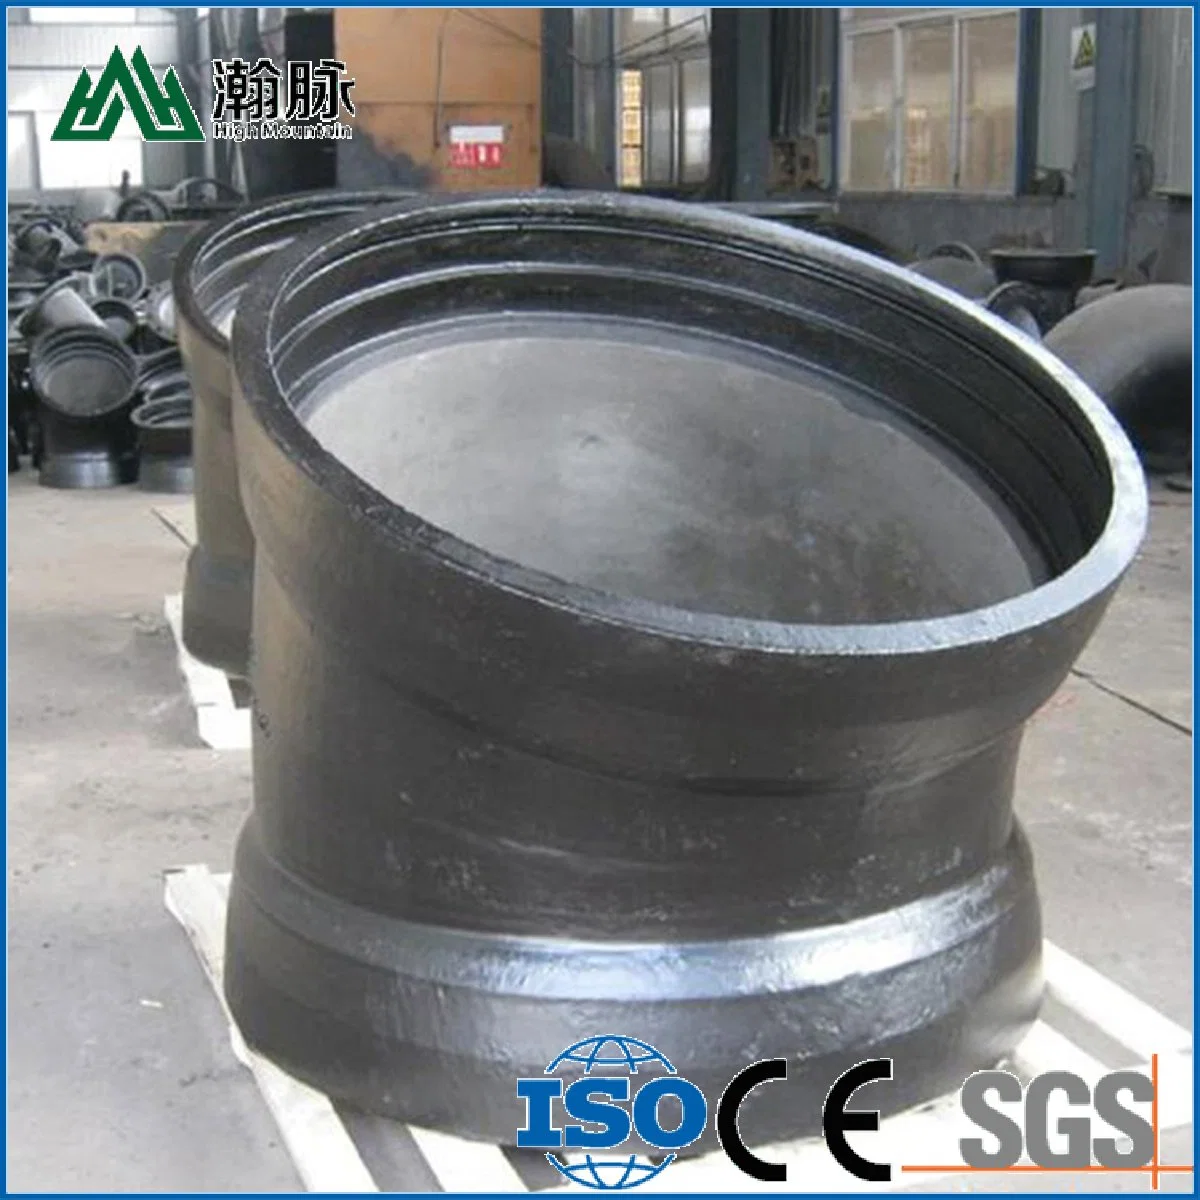 Cast Iron Rising Stem Knife Gate Valve with Electric Iron Blank Flanged Dismantling Joint